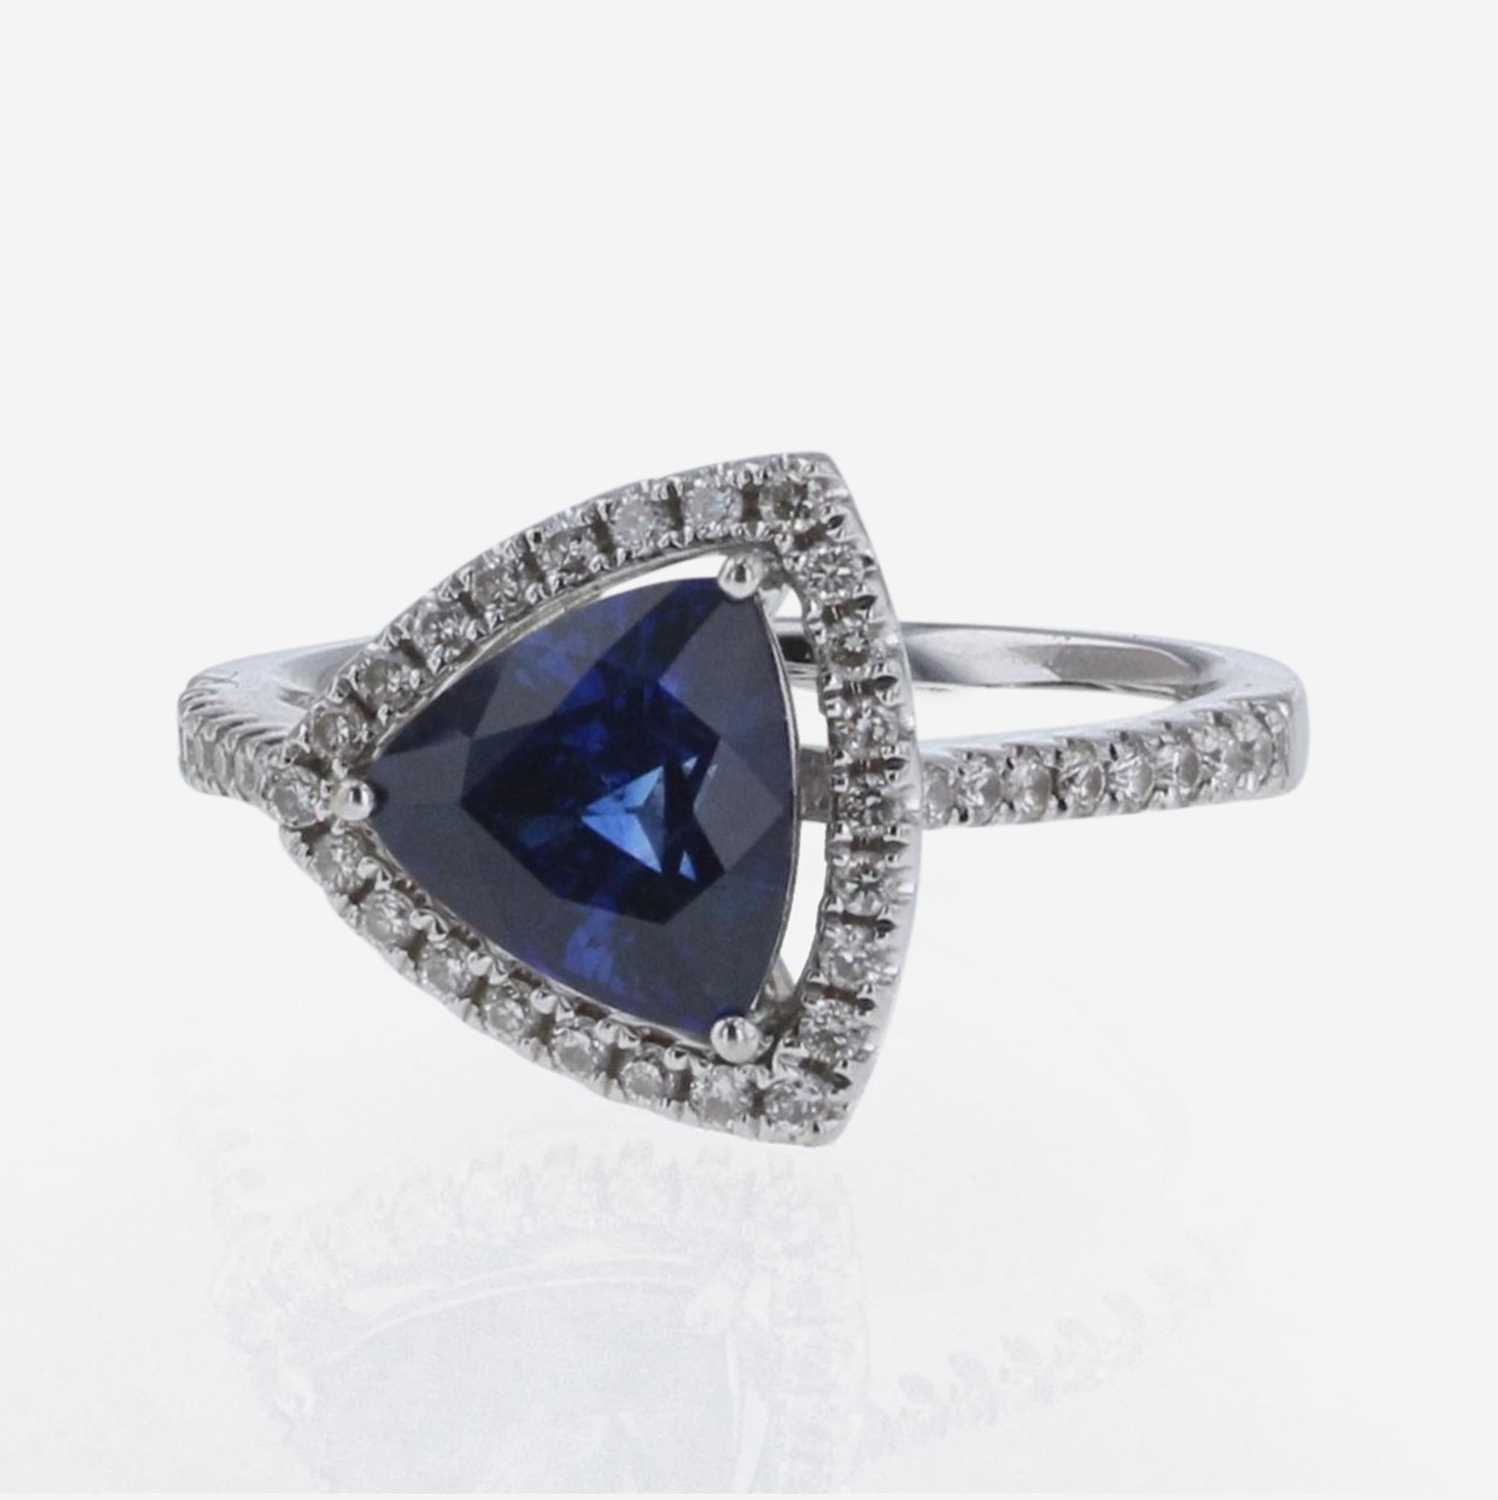 Lot 295 - Sapphire, Diamond, and 18K White Gold Chow Tai Fook Ring